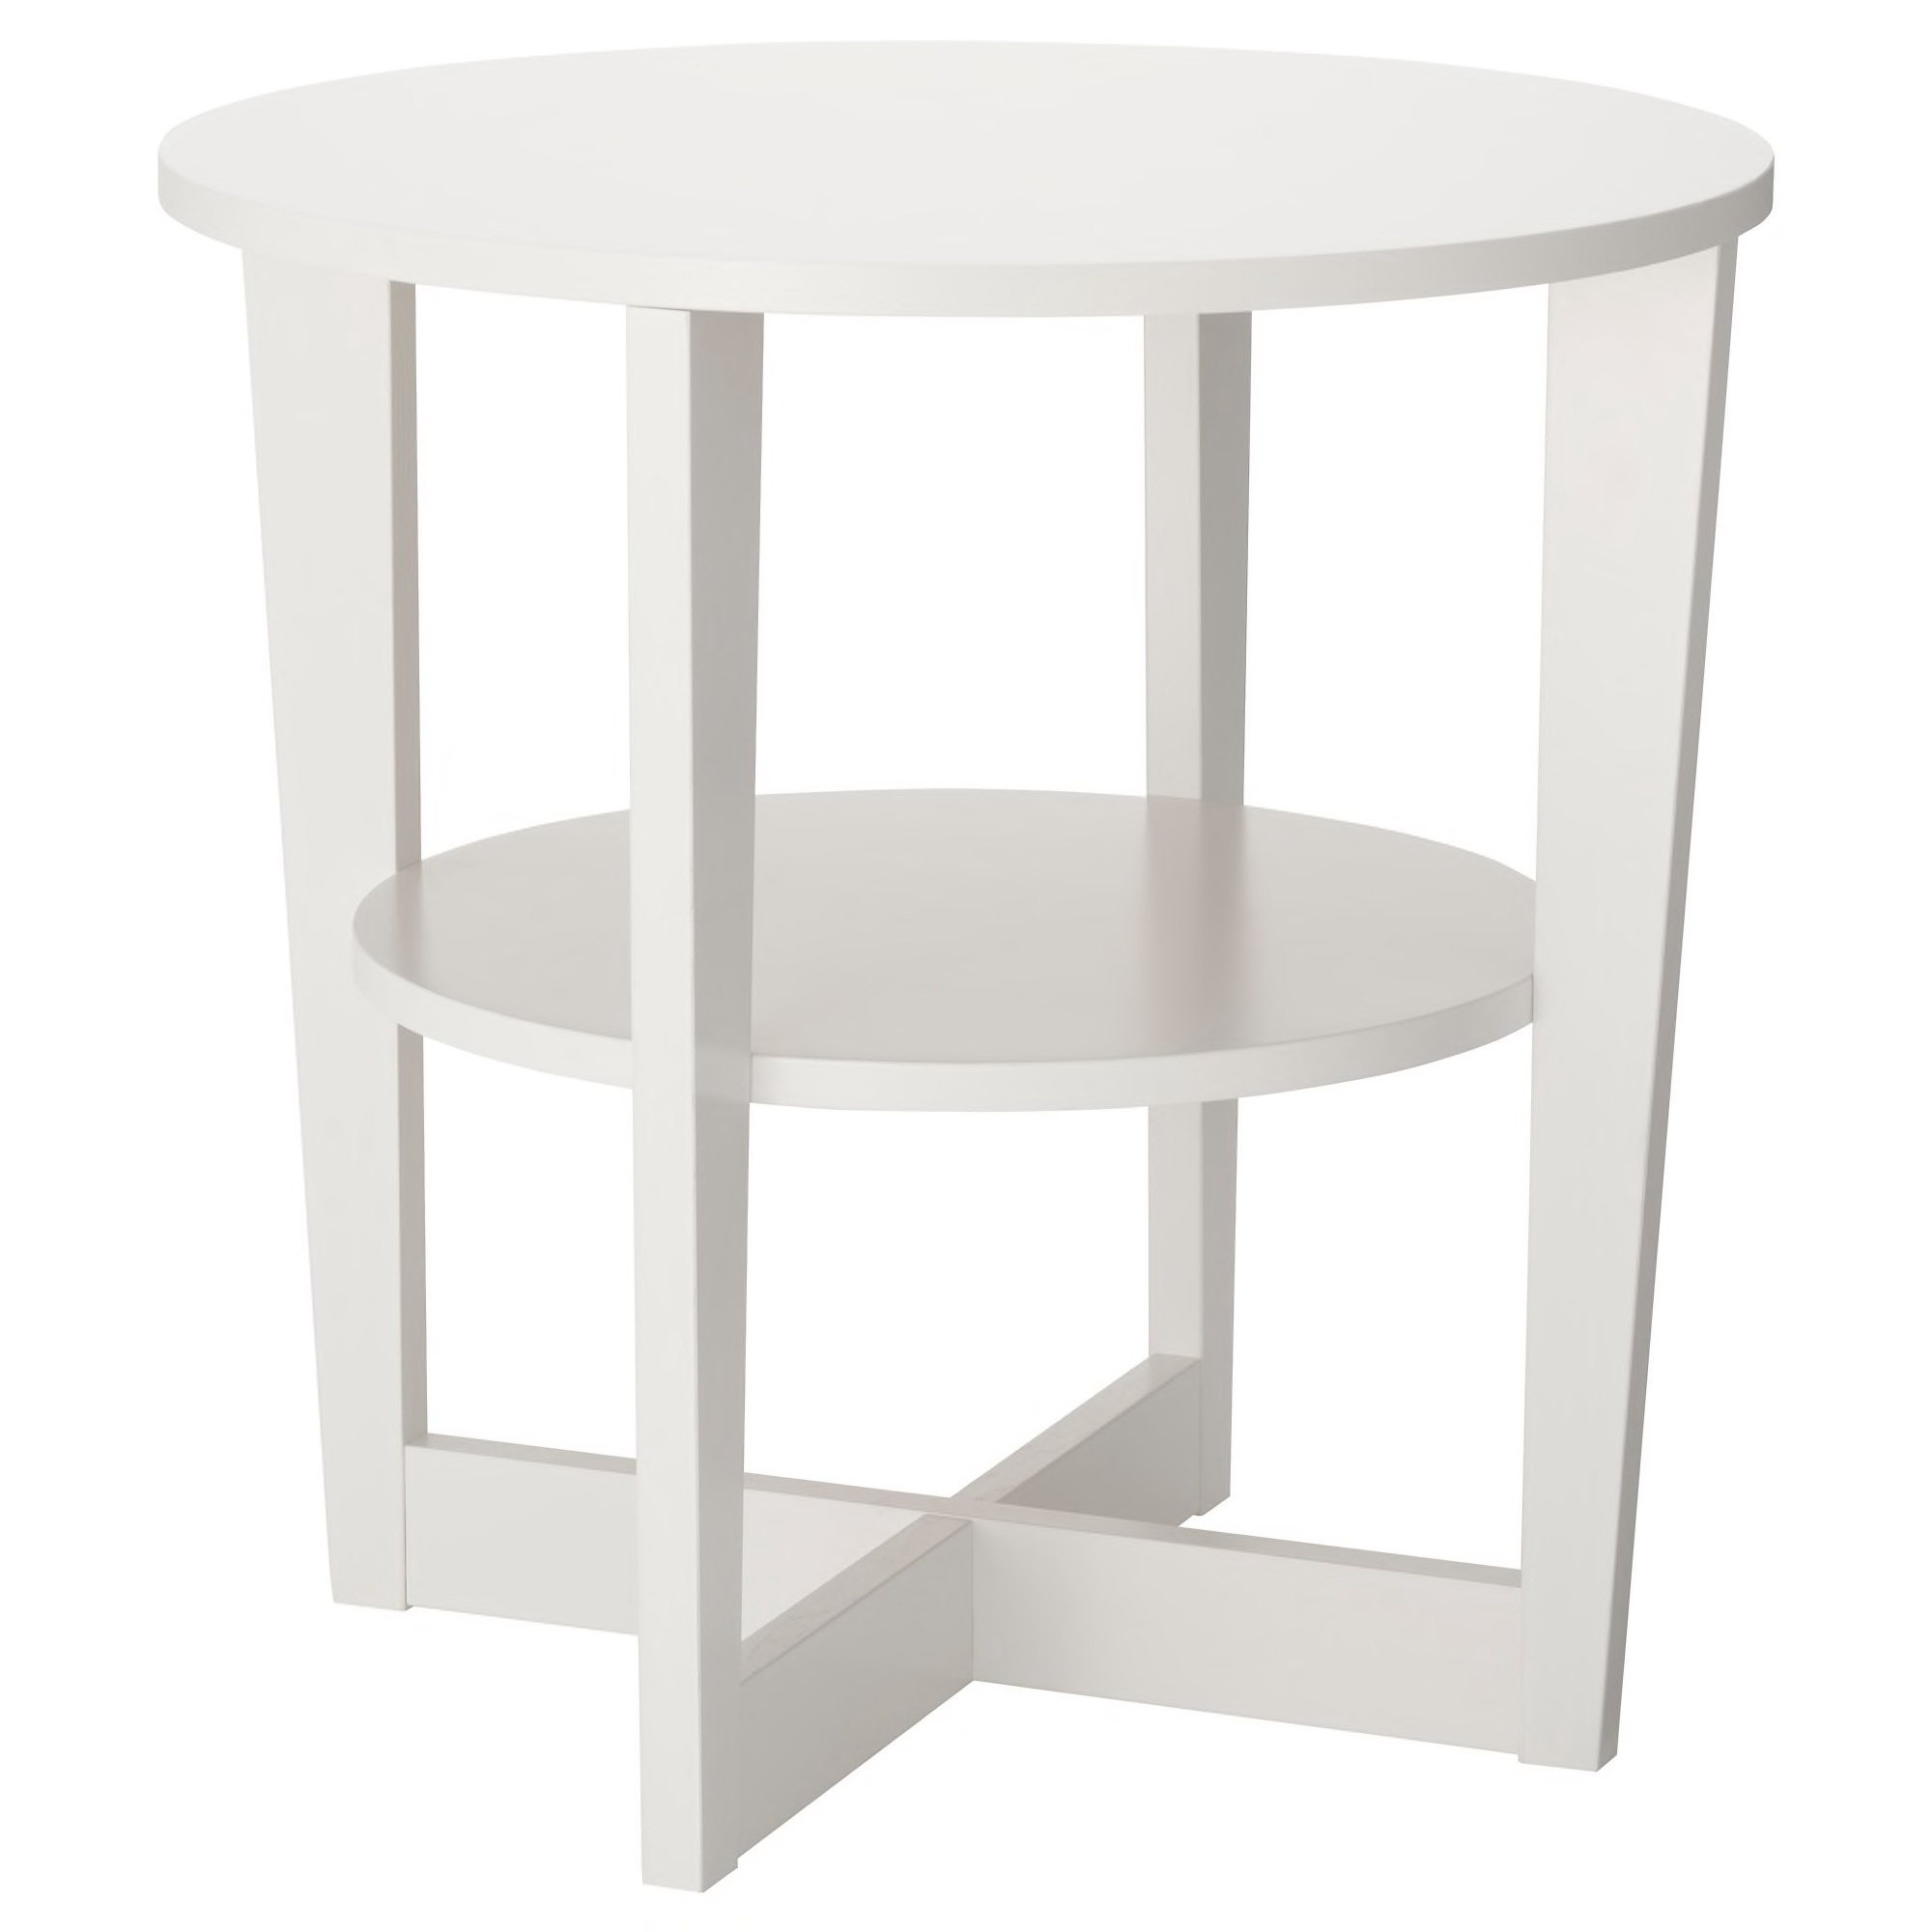 vejmon side table white ikea outdoor accent inter systems privacy policy responsible disclosure cocktail decor ethan allen media console christmas linen tablecloths extendable